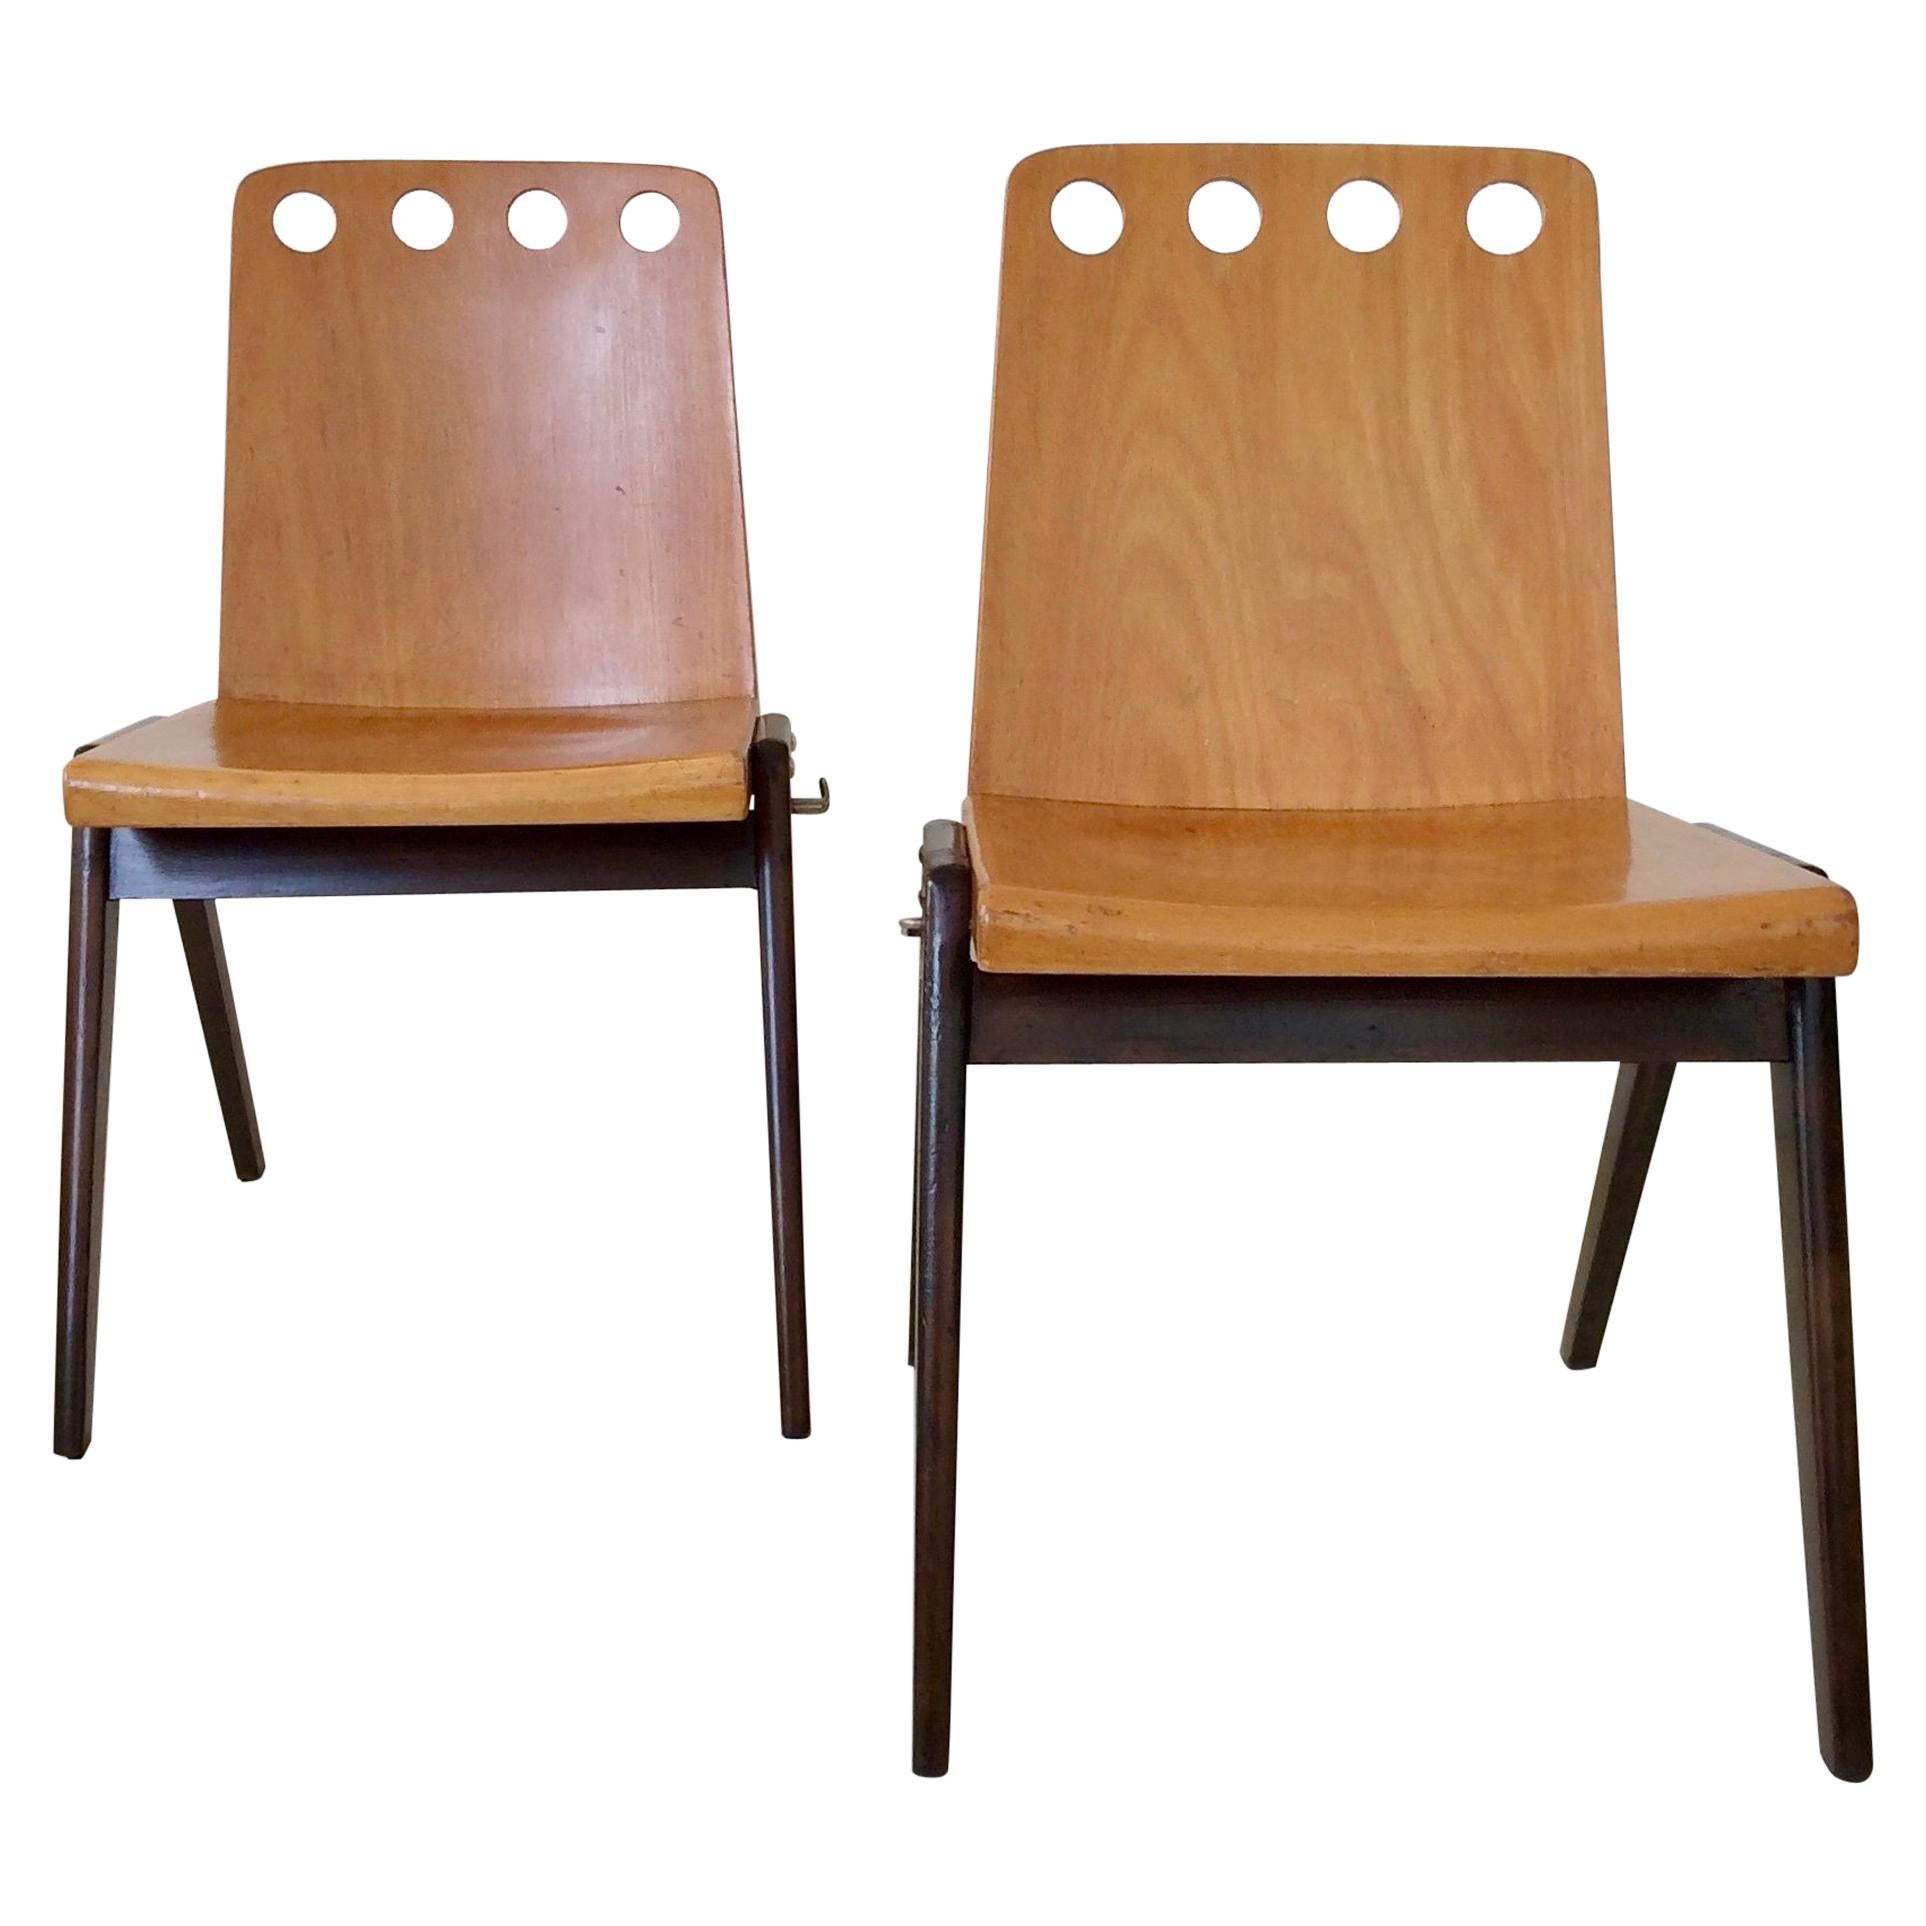 Pair of Stacking Chairs, circa 1950, Austria